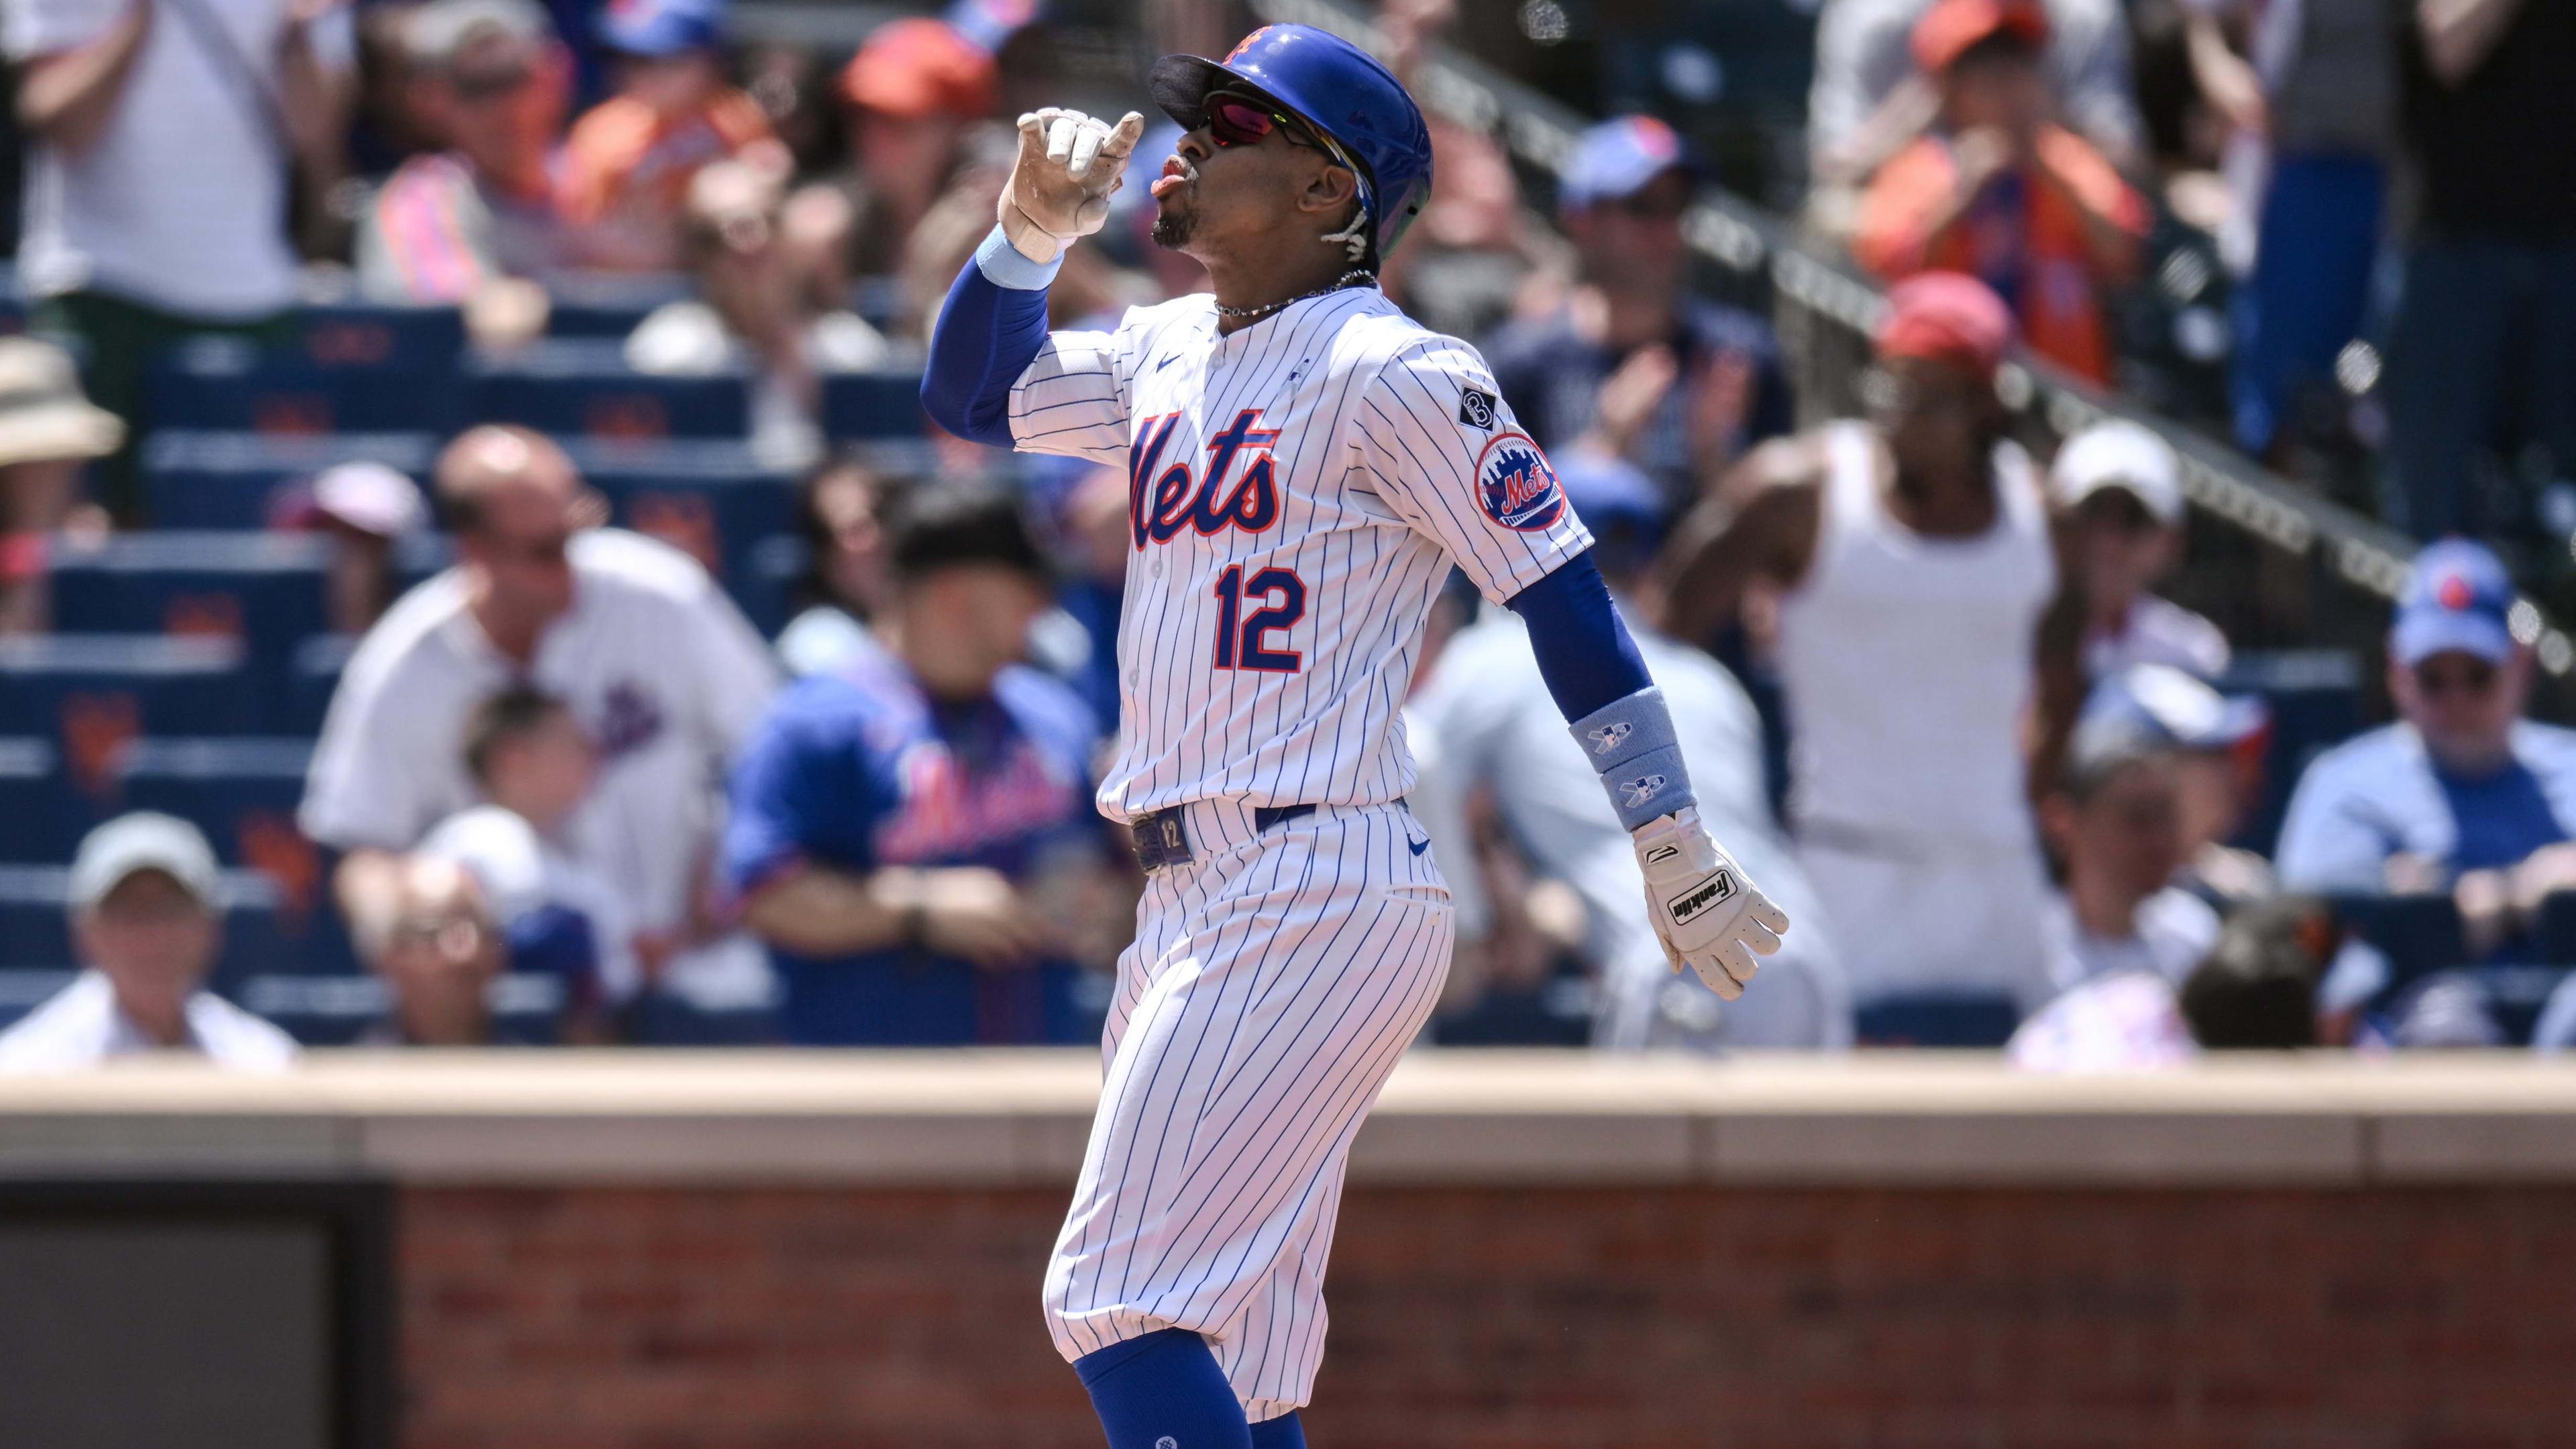 New York Mets shortstop Francisco Lindor (12) rounds the bases after hitting a solo home run against the San Diego Padres during the first inning at Citi Field / John Jones - USA TODAY Sports